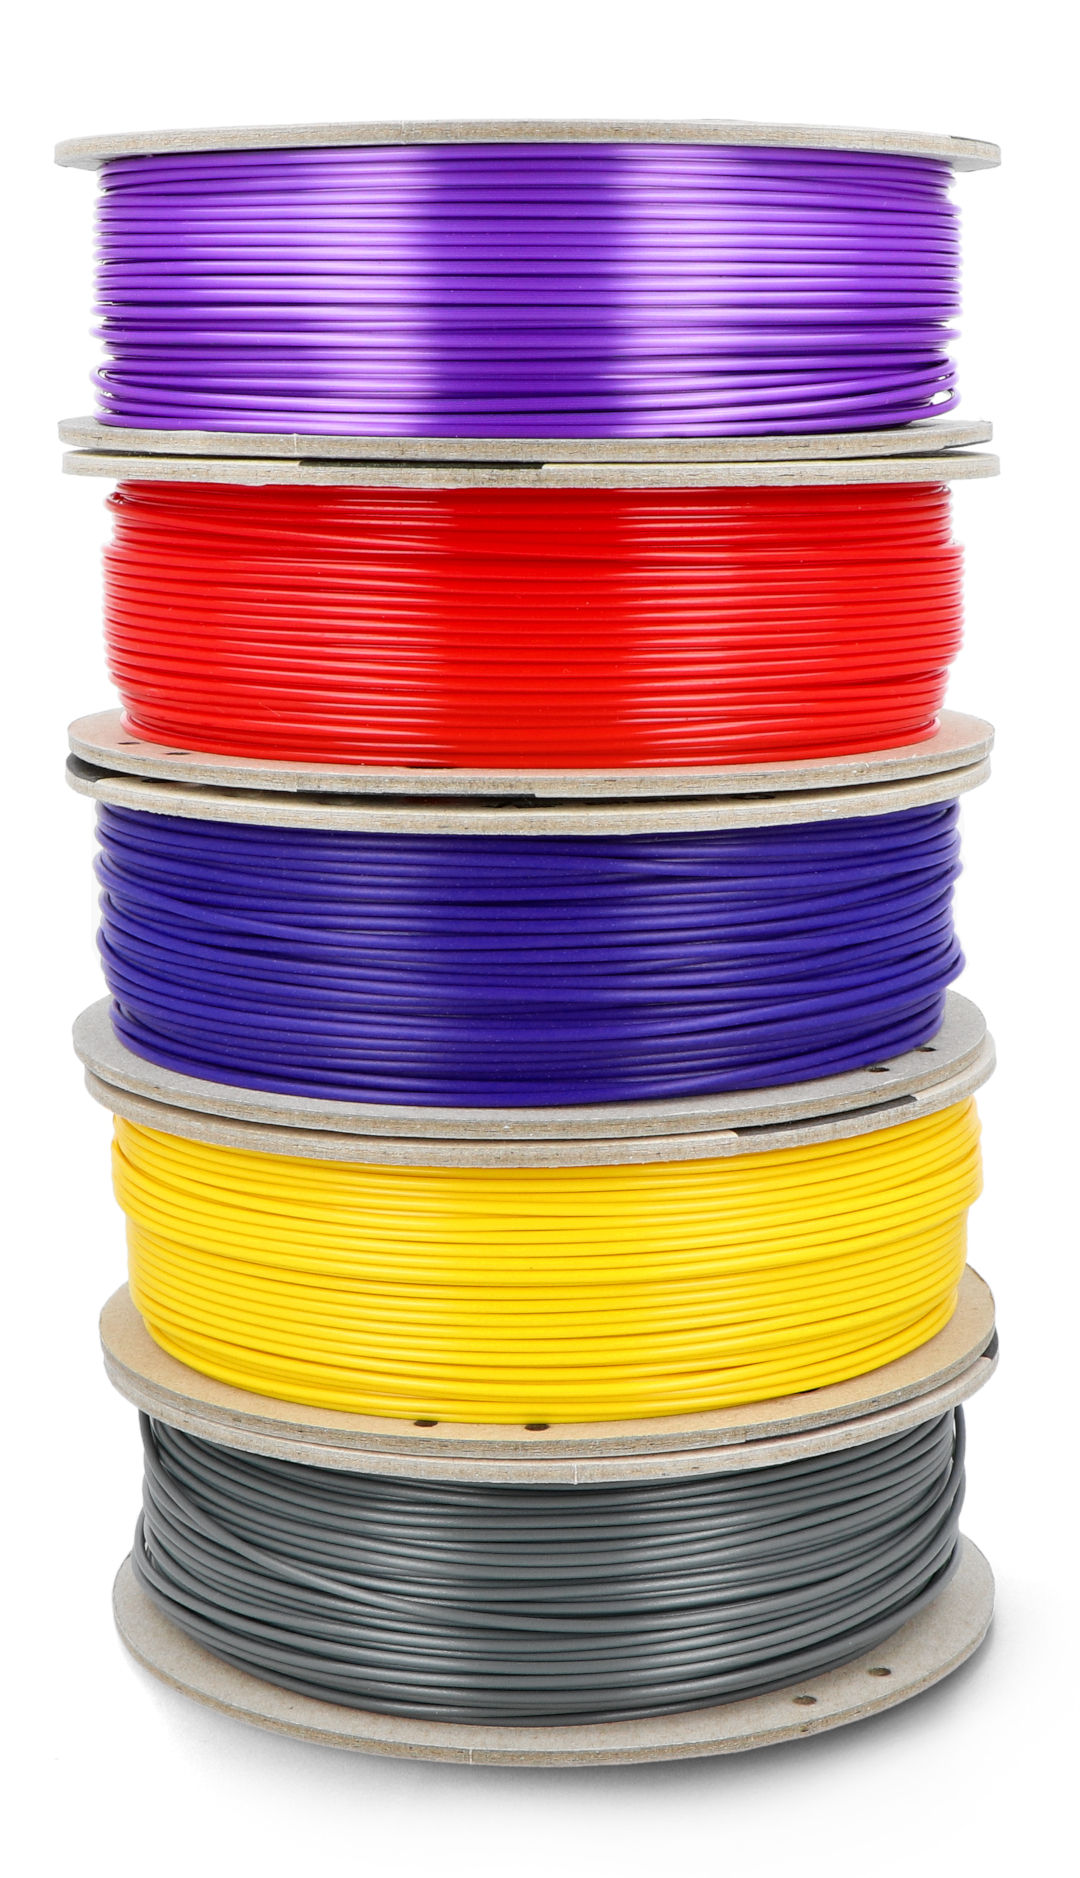 1.75mm ABS 3D Printer Filament 12 Spools Bundle, 12 Most Beautiful ABS  Colors Packed, Each Spools 0.5kg, Total 6kgs 3D Printer ABS Material with  One